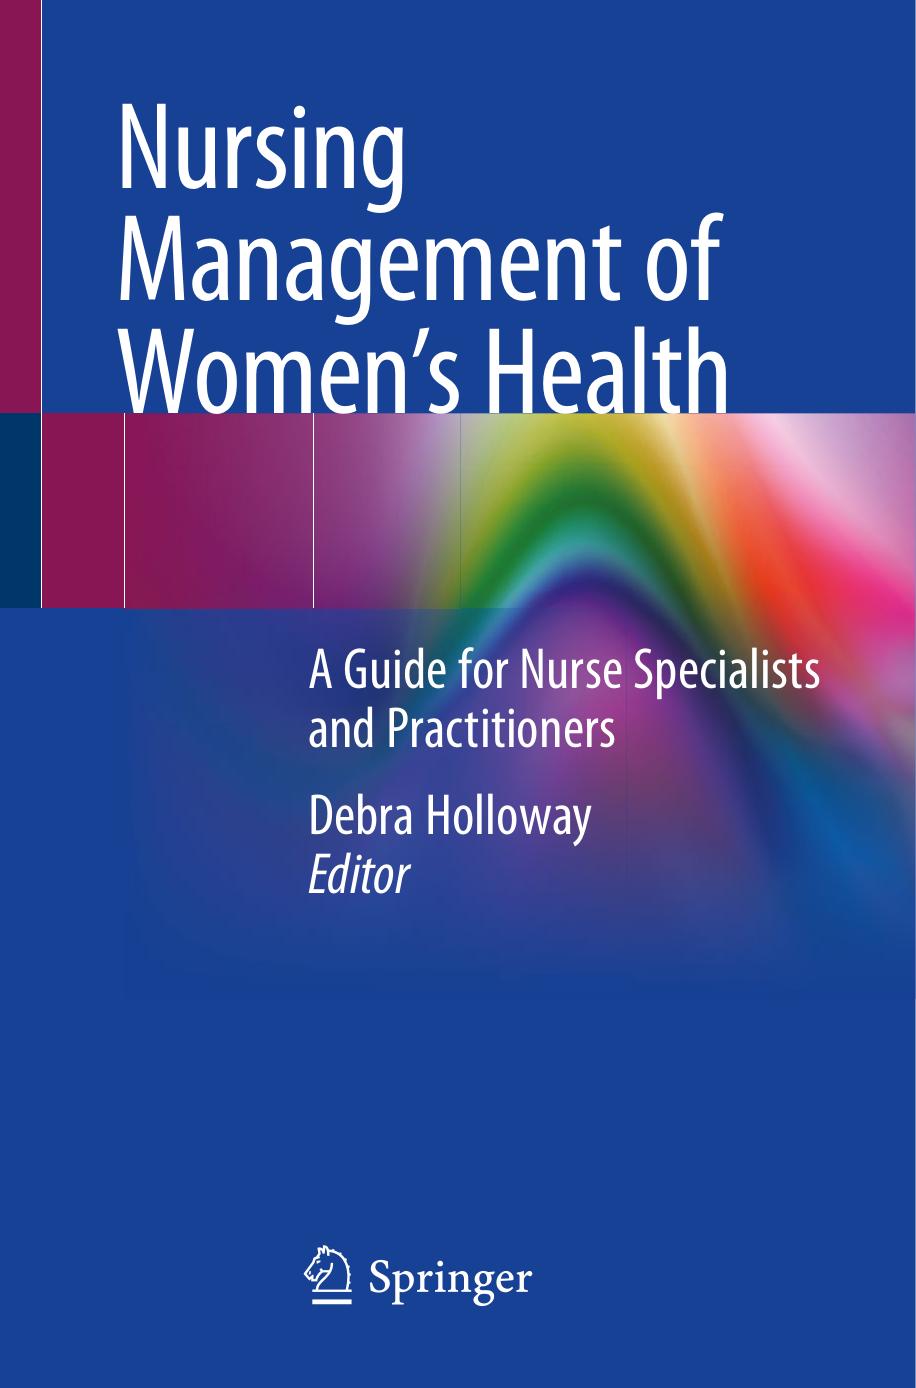 Nursing Management of Women’s Health  A Guide for Nurse Specialists and Practitioners (2020)